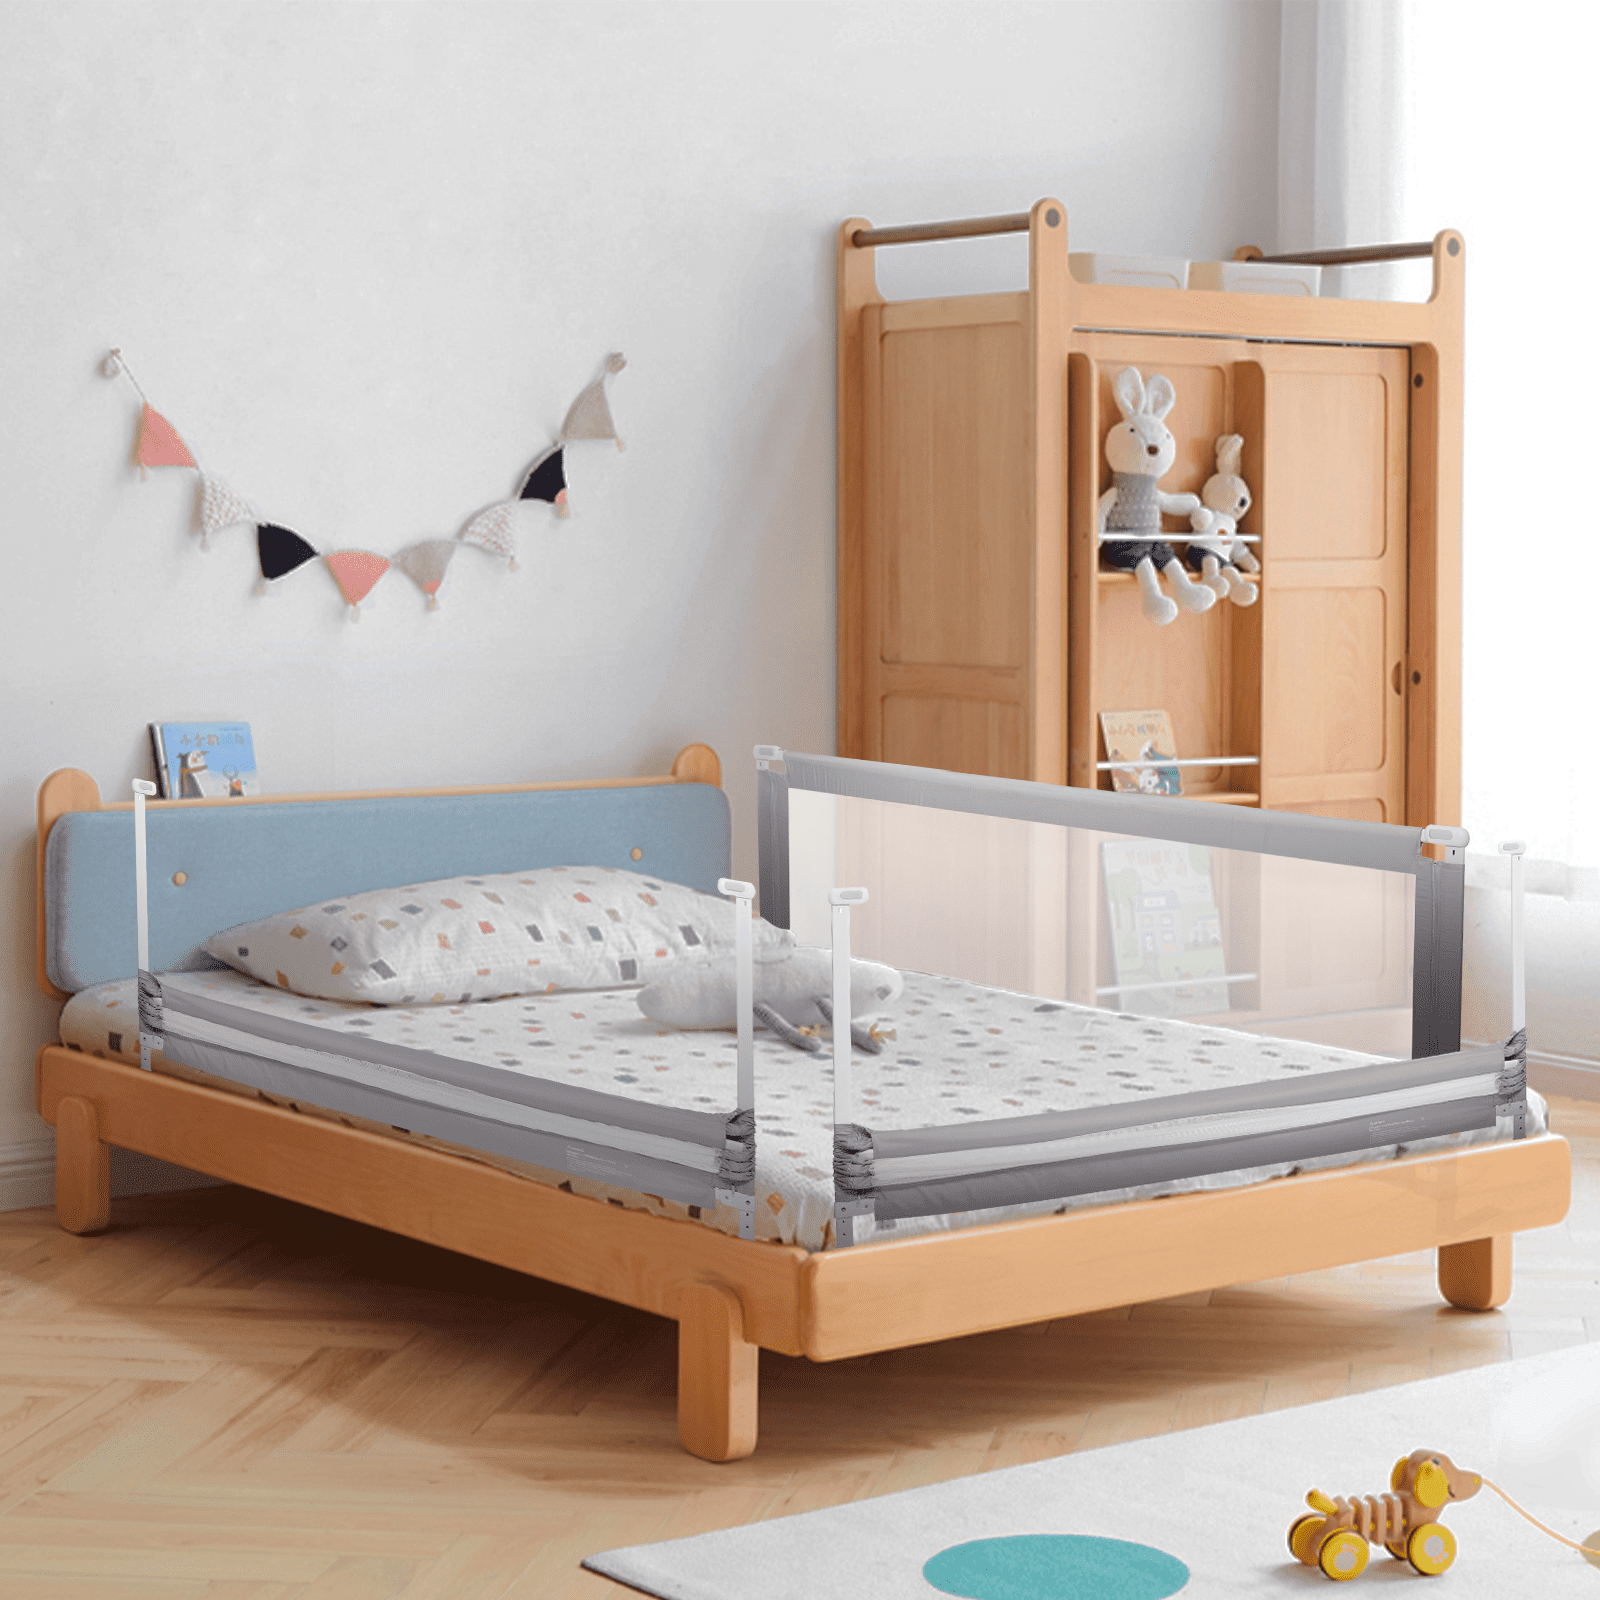 Toddler Bed Rails for Kids Bed Fence Bumper Rail Guard Toddler Bed Rail Guard with Oxford Cloth and Iron Tube Fold Safety Bed Rail 200x68cm 